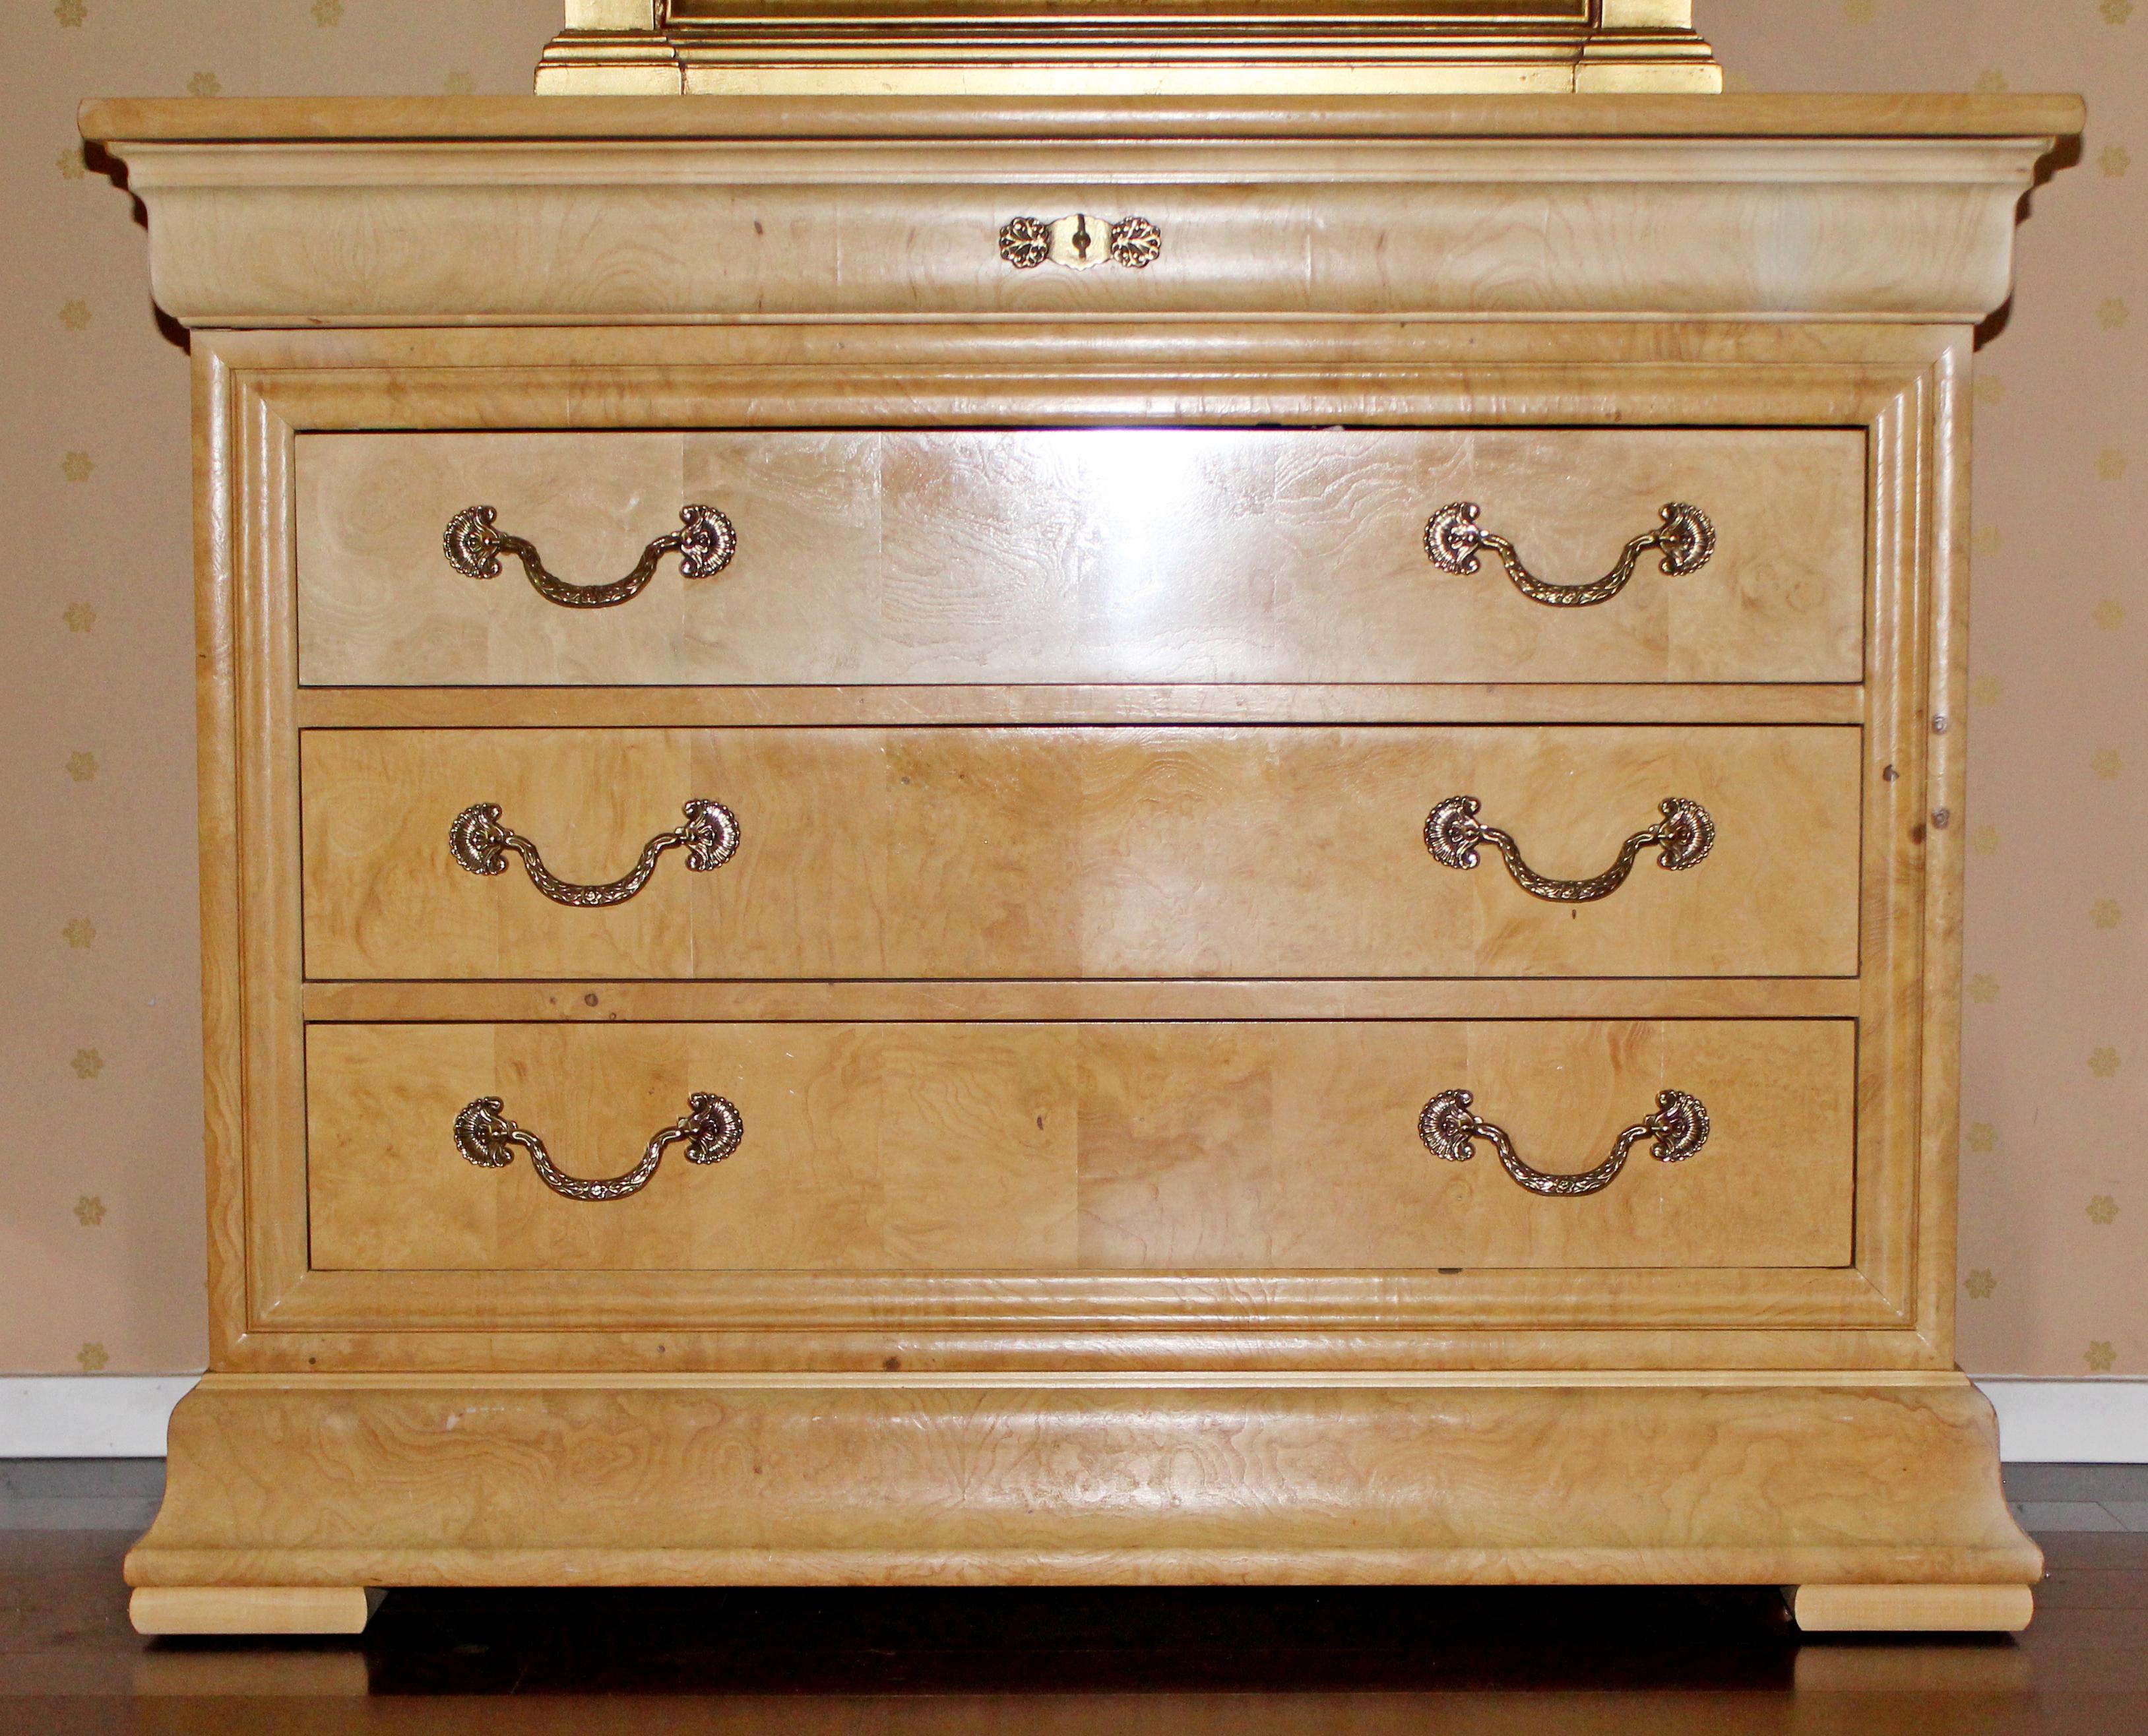 For your consideration is a gorgeous light burl wood dresser nightstand, with three drawers that have brass handles, in the style of Henredon. In excellent condition. The dimensions are 44